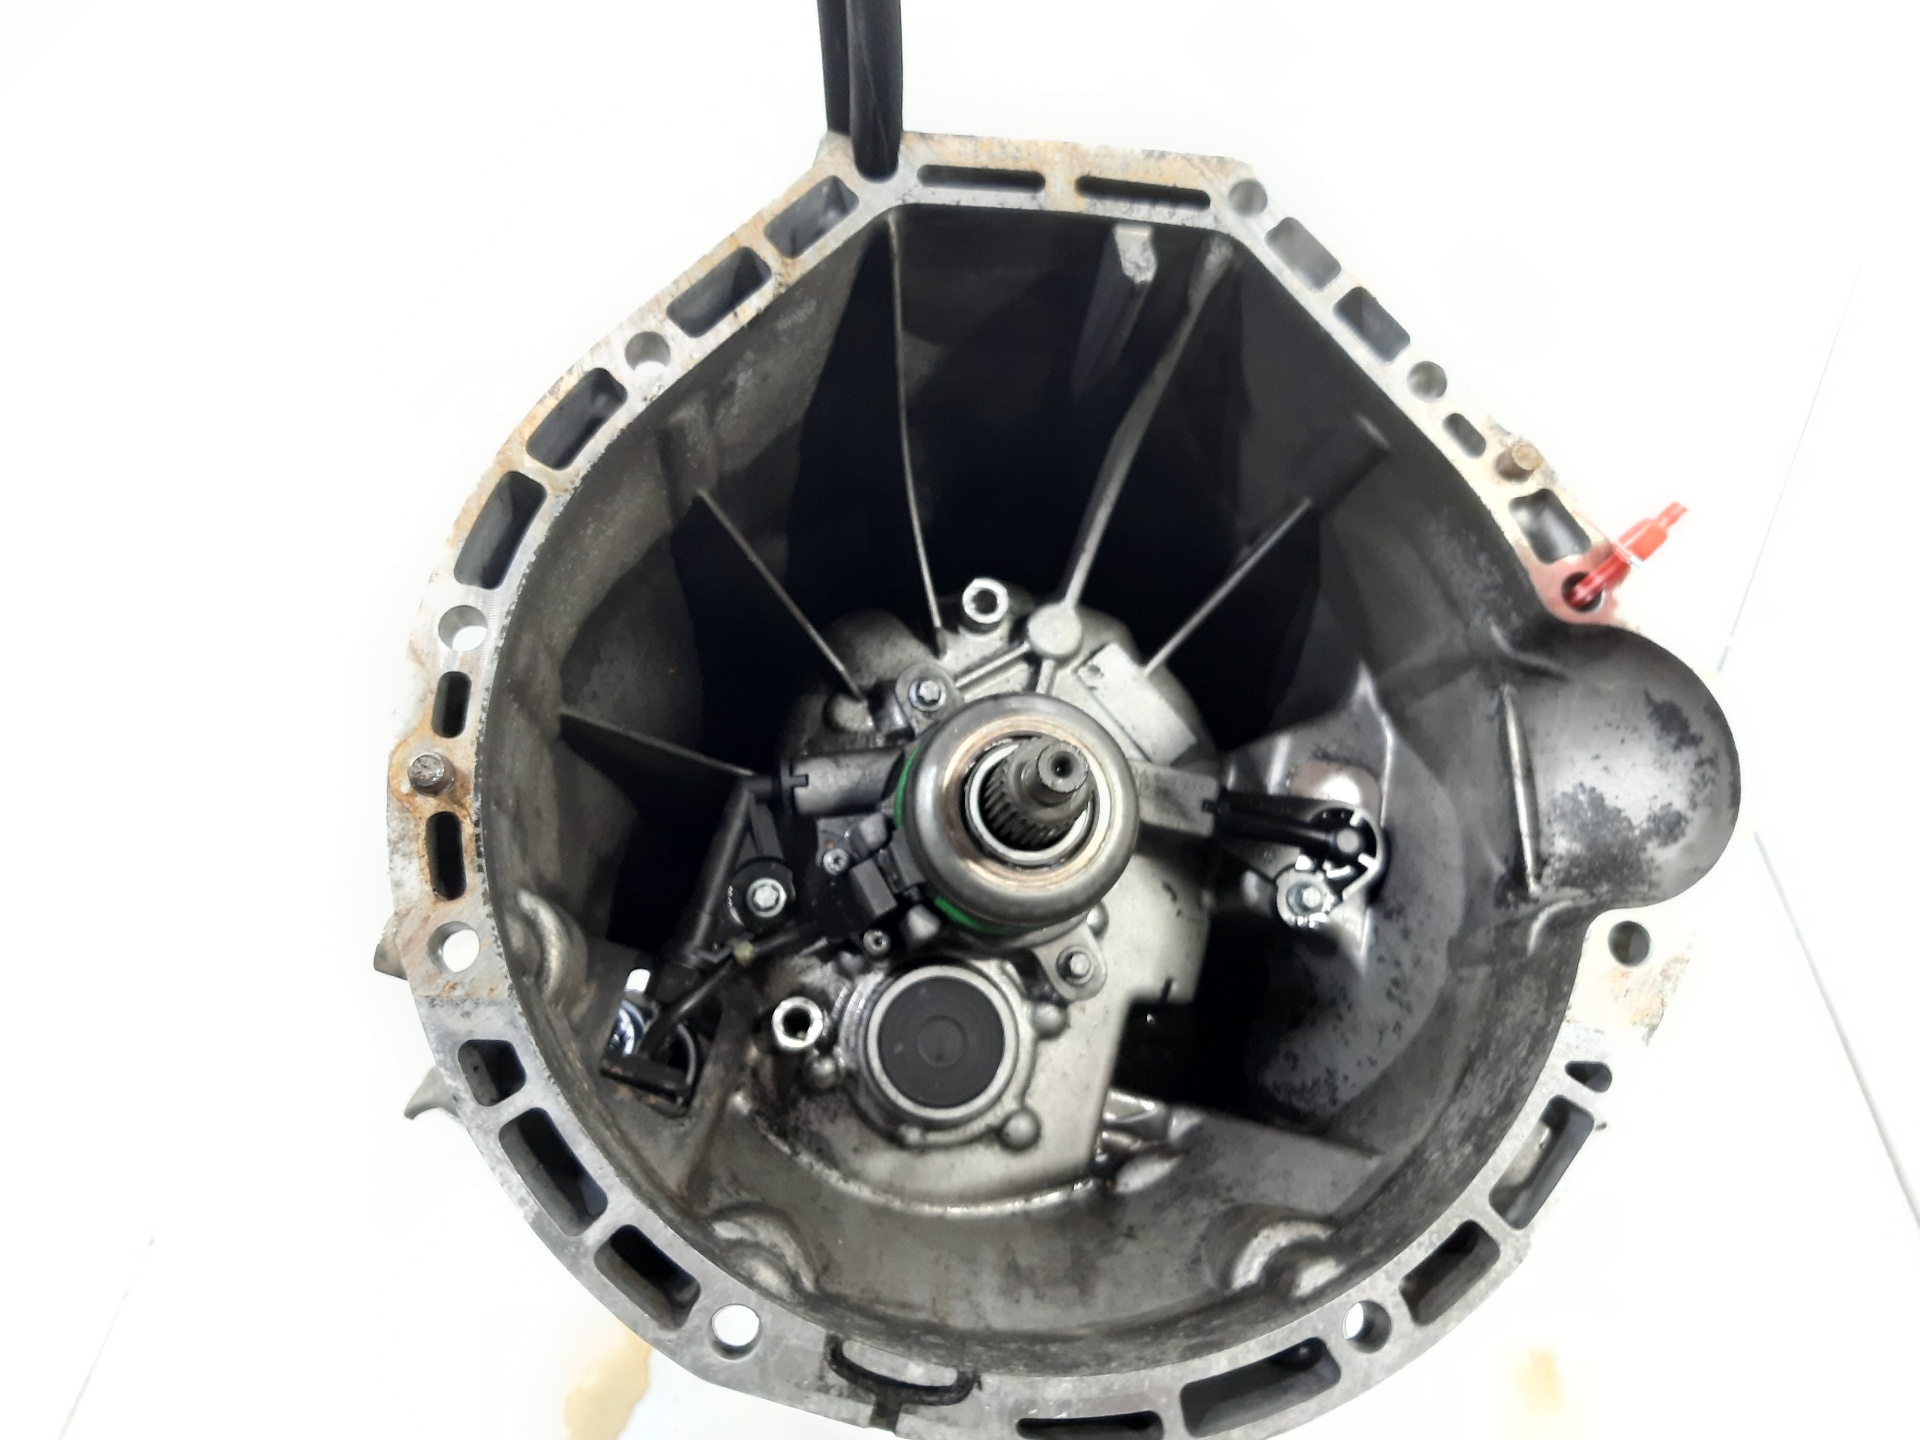 MERCEDES-BENZ C-Class W203/S203/CL203 (2000-2008) Gearbox R2032610701, 6VELOCIDADES 24544648